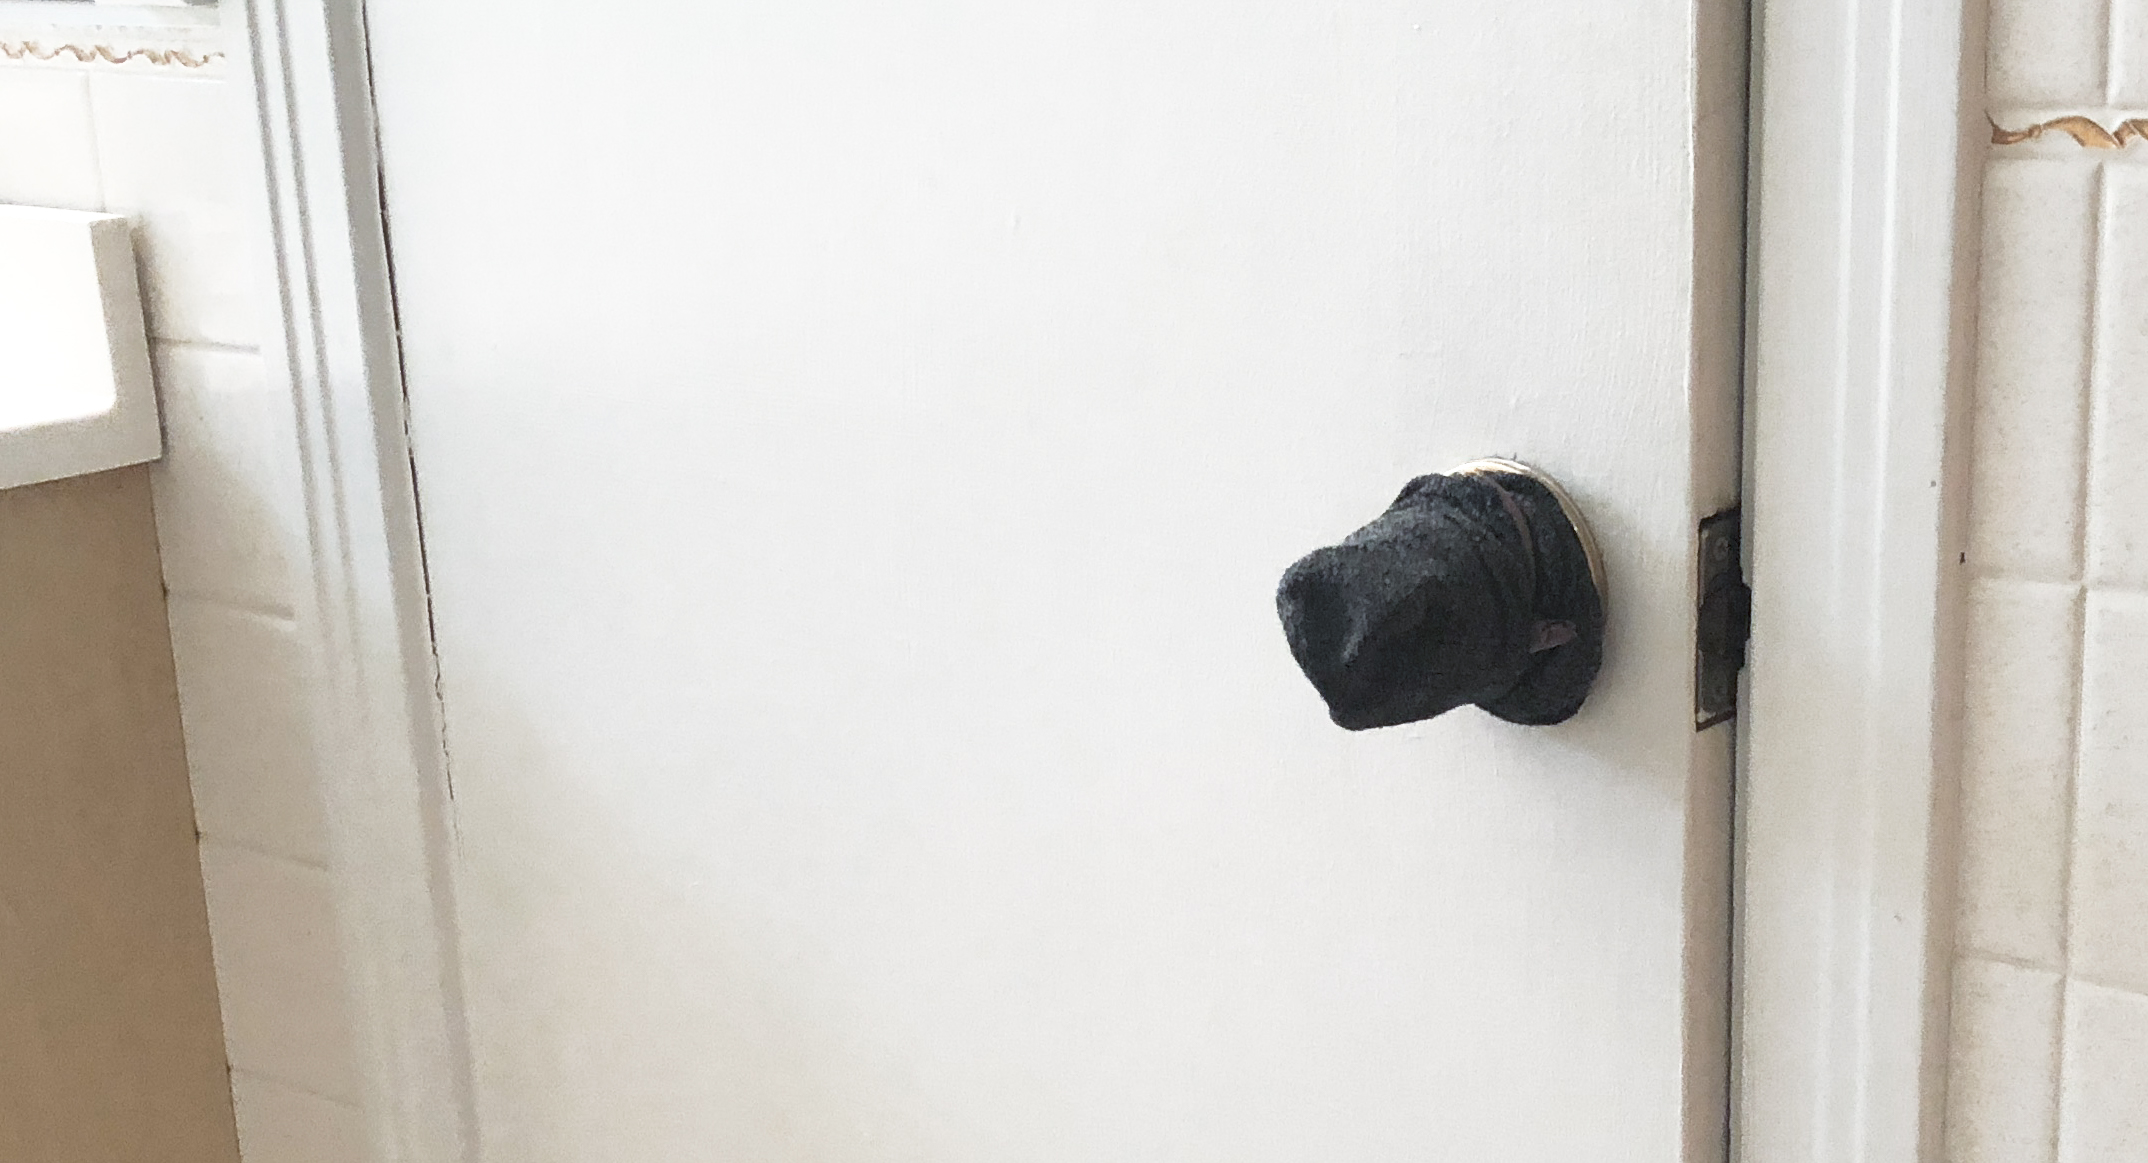 cover doorknobs with socks to prevent them from being opened